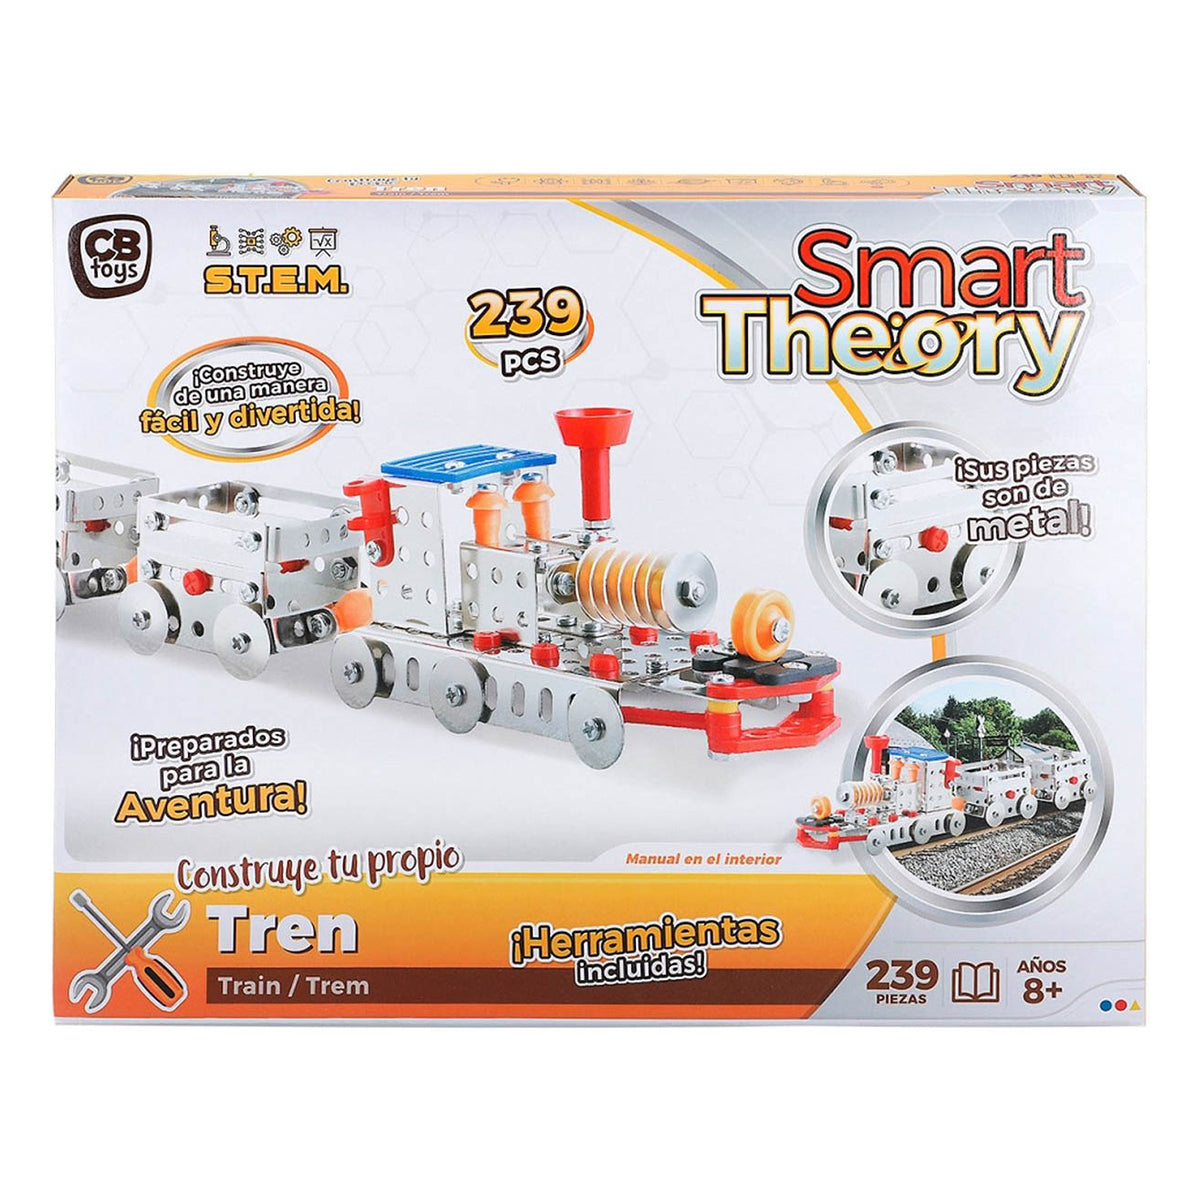 <tc>Ariko</tc> Construction set - Metal Train with Wagons - construction game - construction set train with wagon steel silver 239-piece - Including tools - S.T.E.M. toys - voice toys